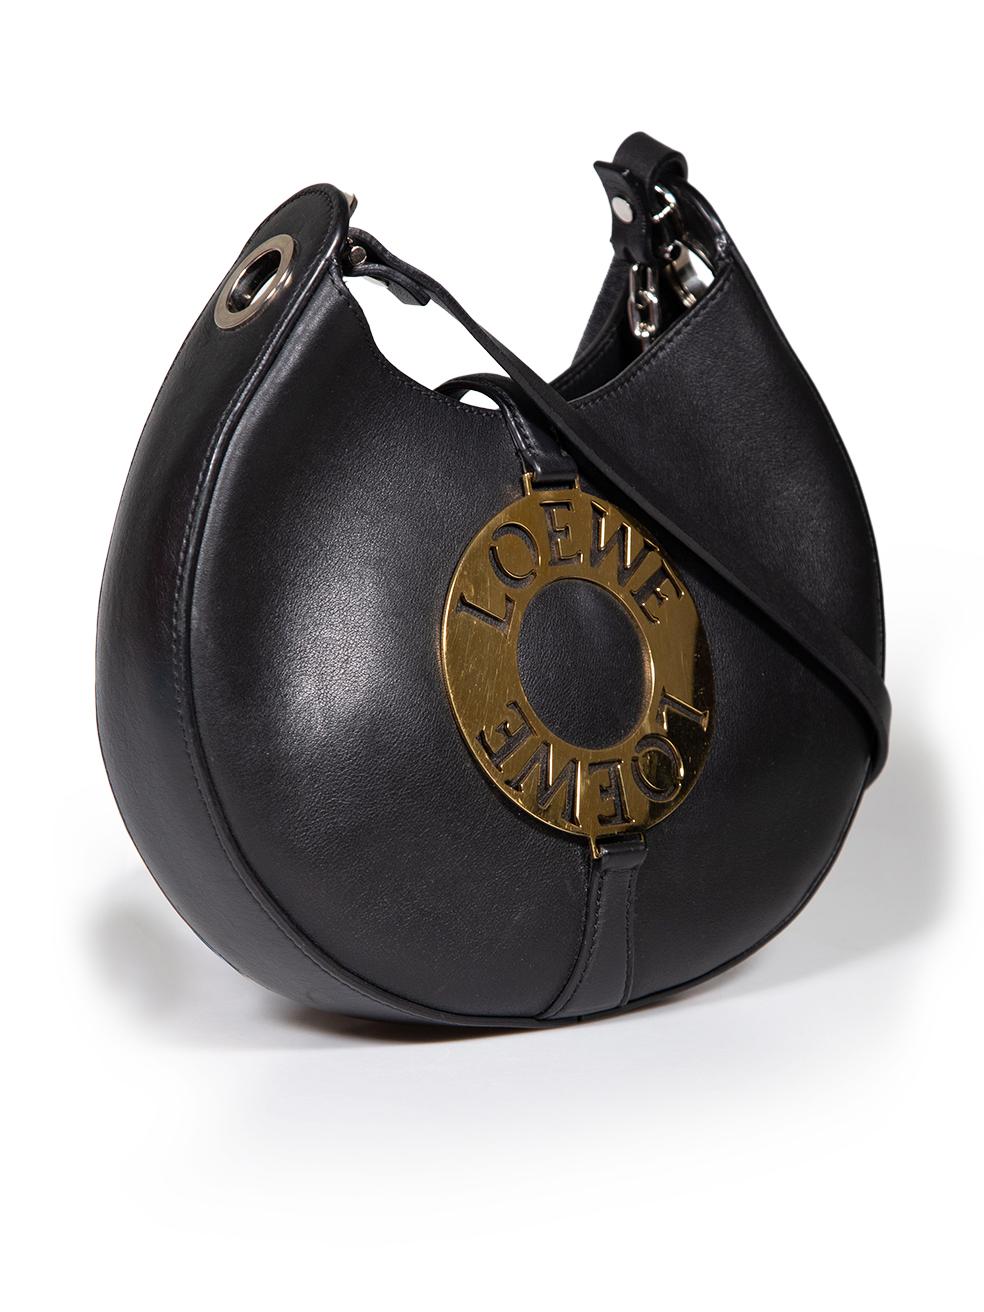 CONDITION is Good. Minor wear to bag is evident. Light wear to the shoulder strap with loose stitching and there are abrasions to the leather at the front, lining and back. Scratches are seen on the metal hardware on this used Loewe designer resale